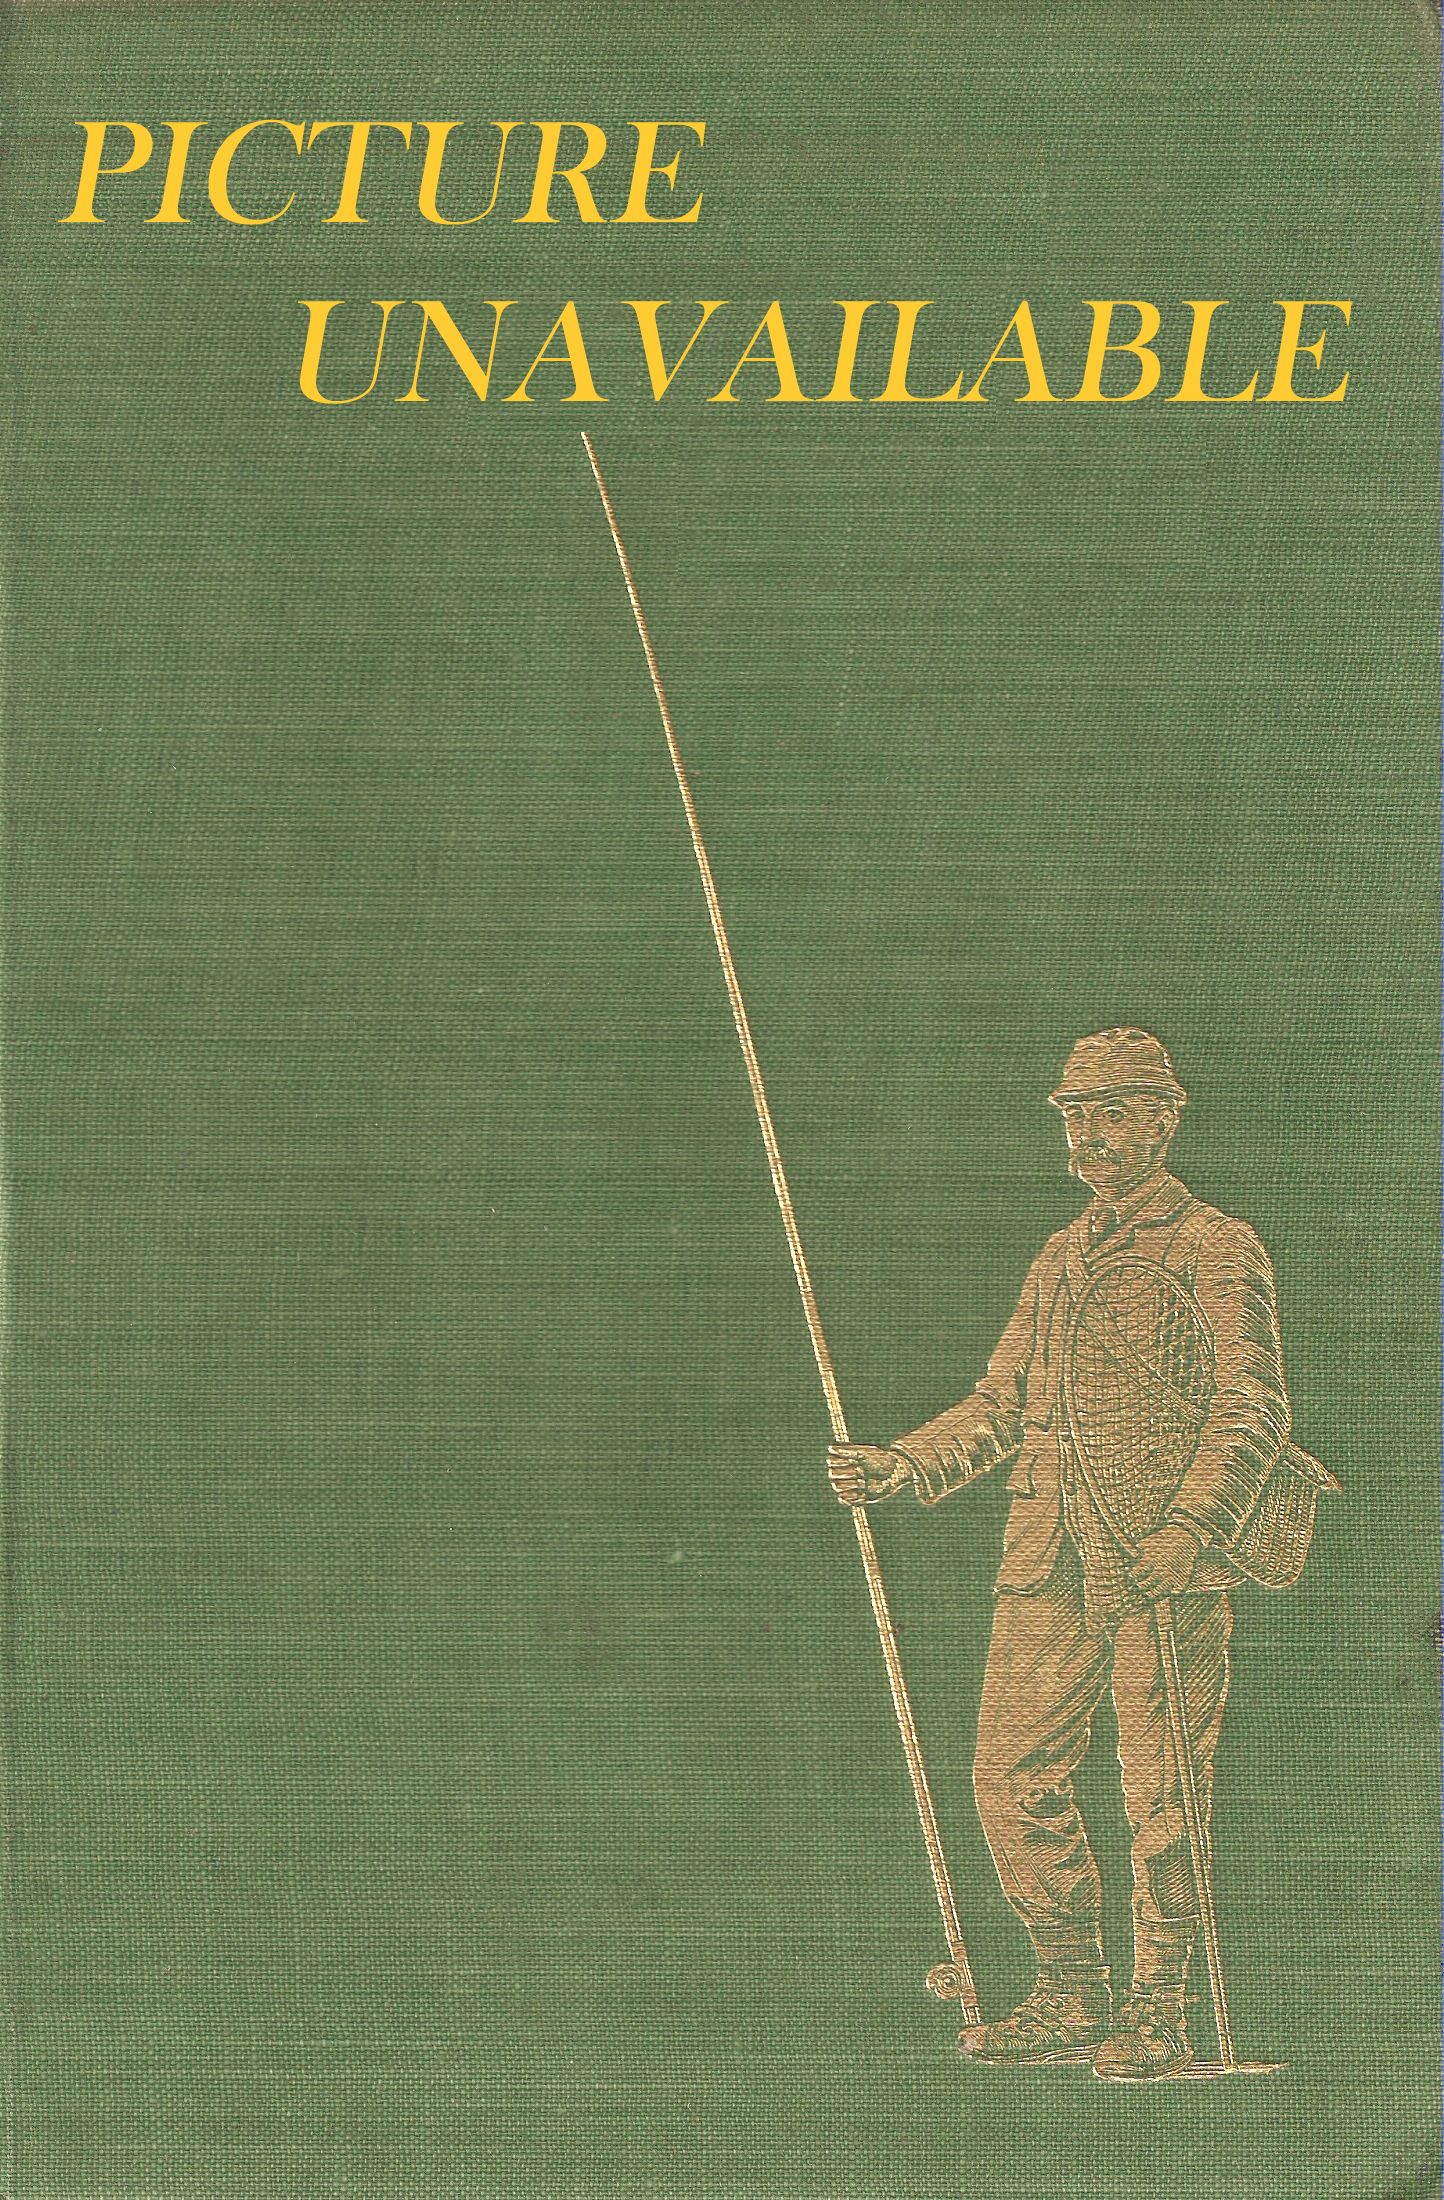 THE SHELL BOOK OF ANGLING. Edited by Richard Walker and Leslie Moncrieff.